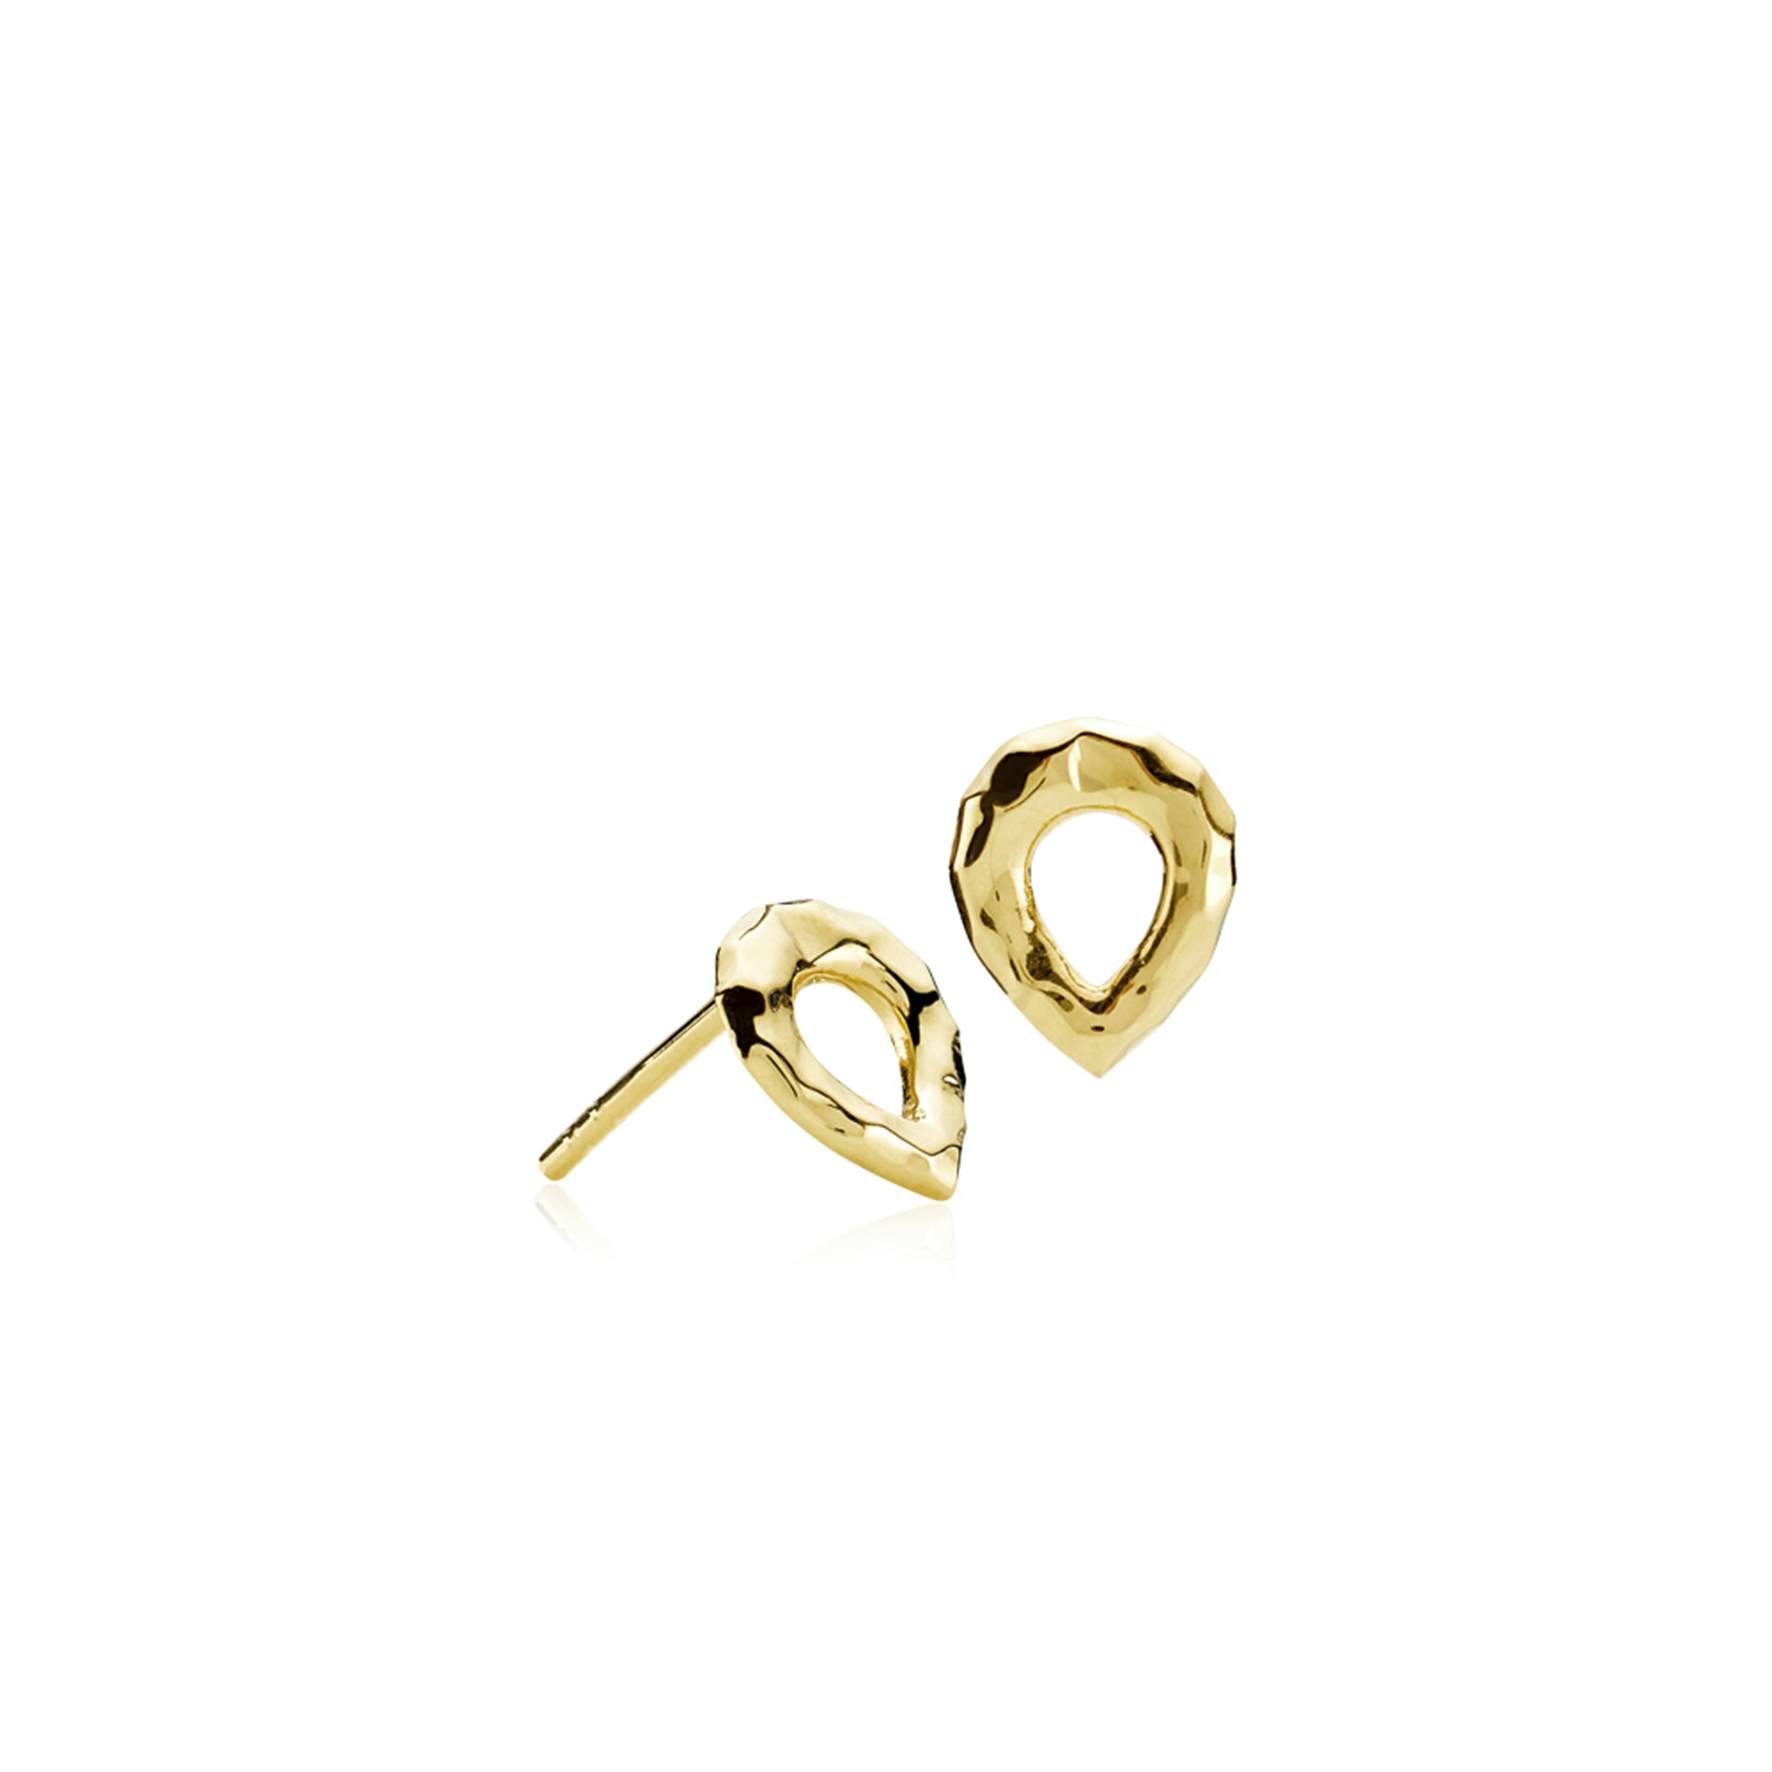 Cecilie Schmeichel Earsticks from Izabel Camille in Goldplated-Silver Sterling 925